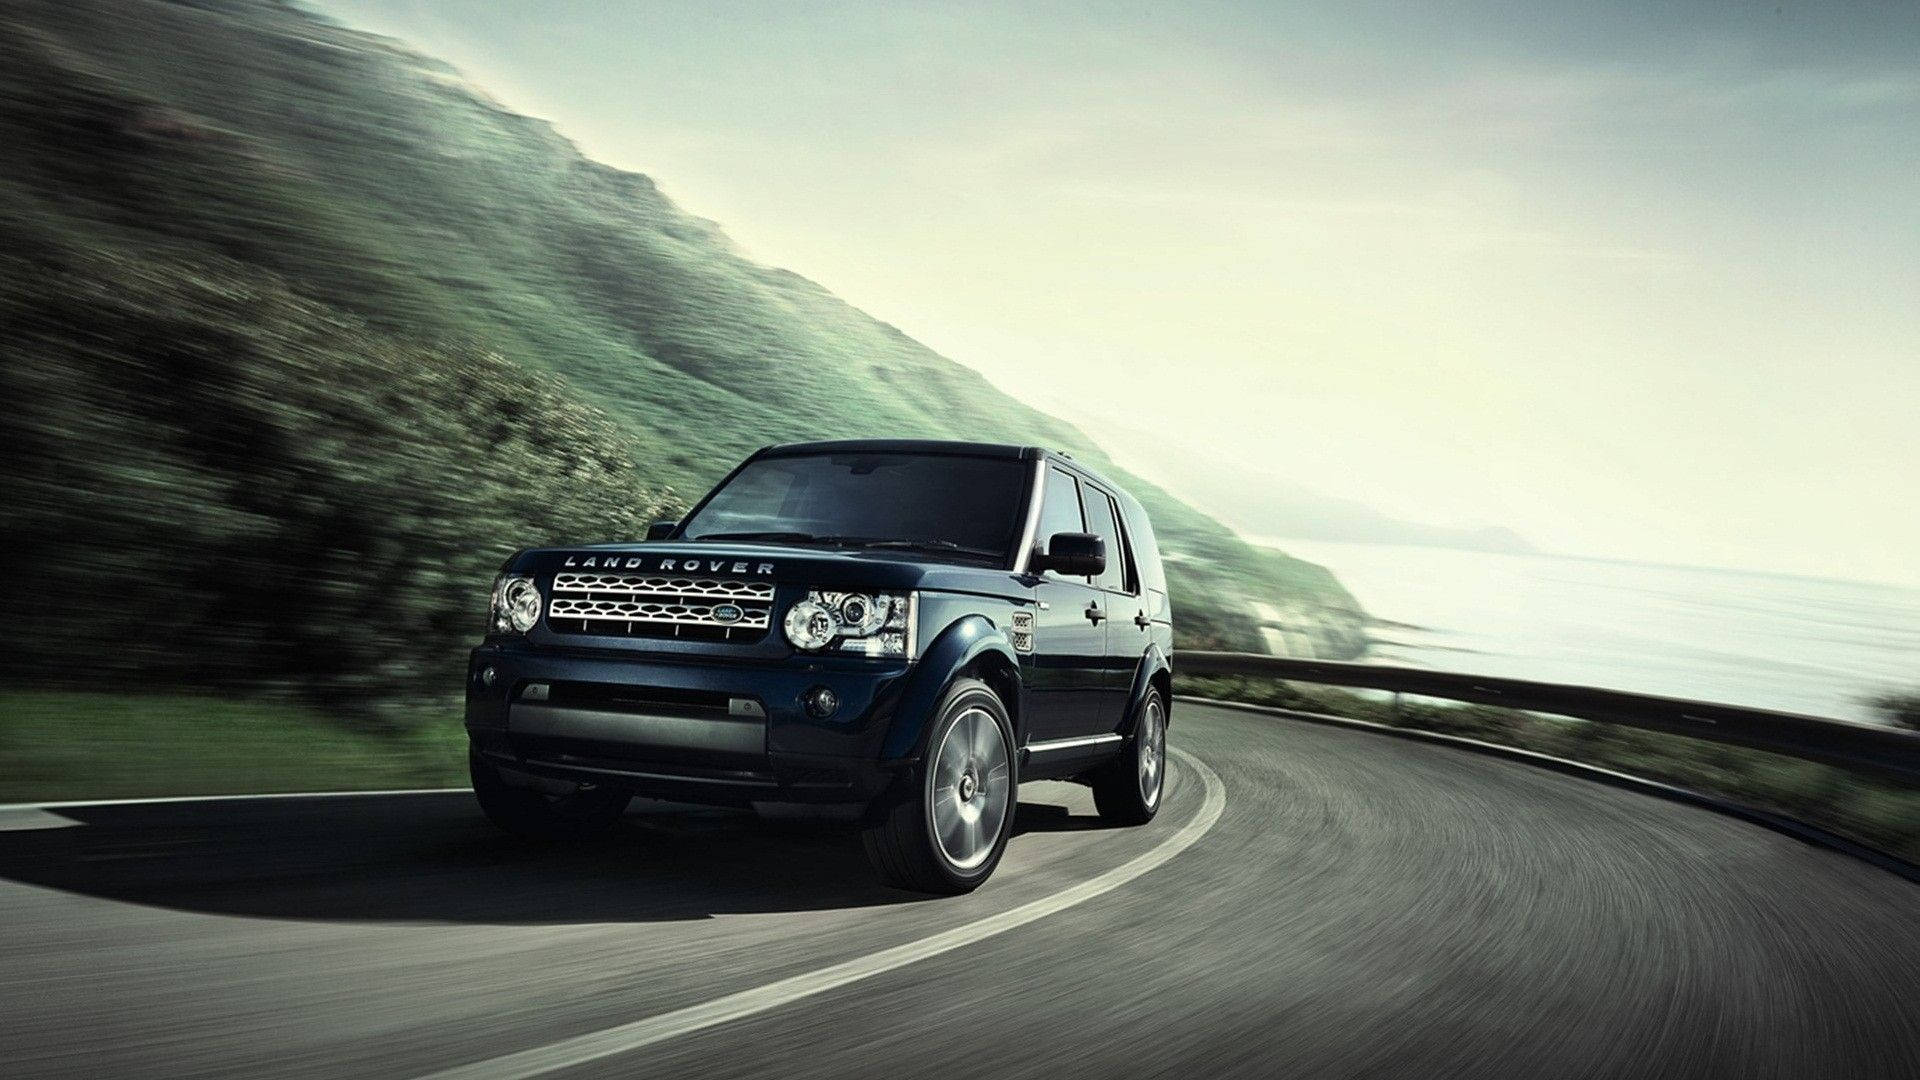 Dark Blue Land Rover Discovery 4 Background